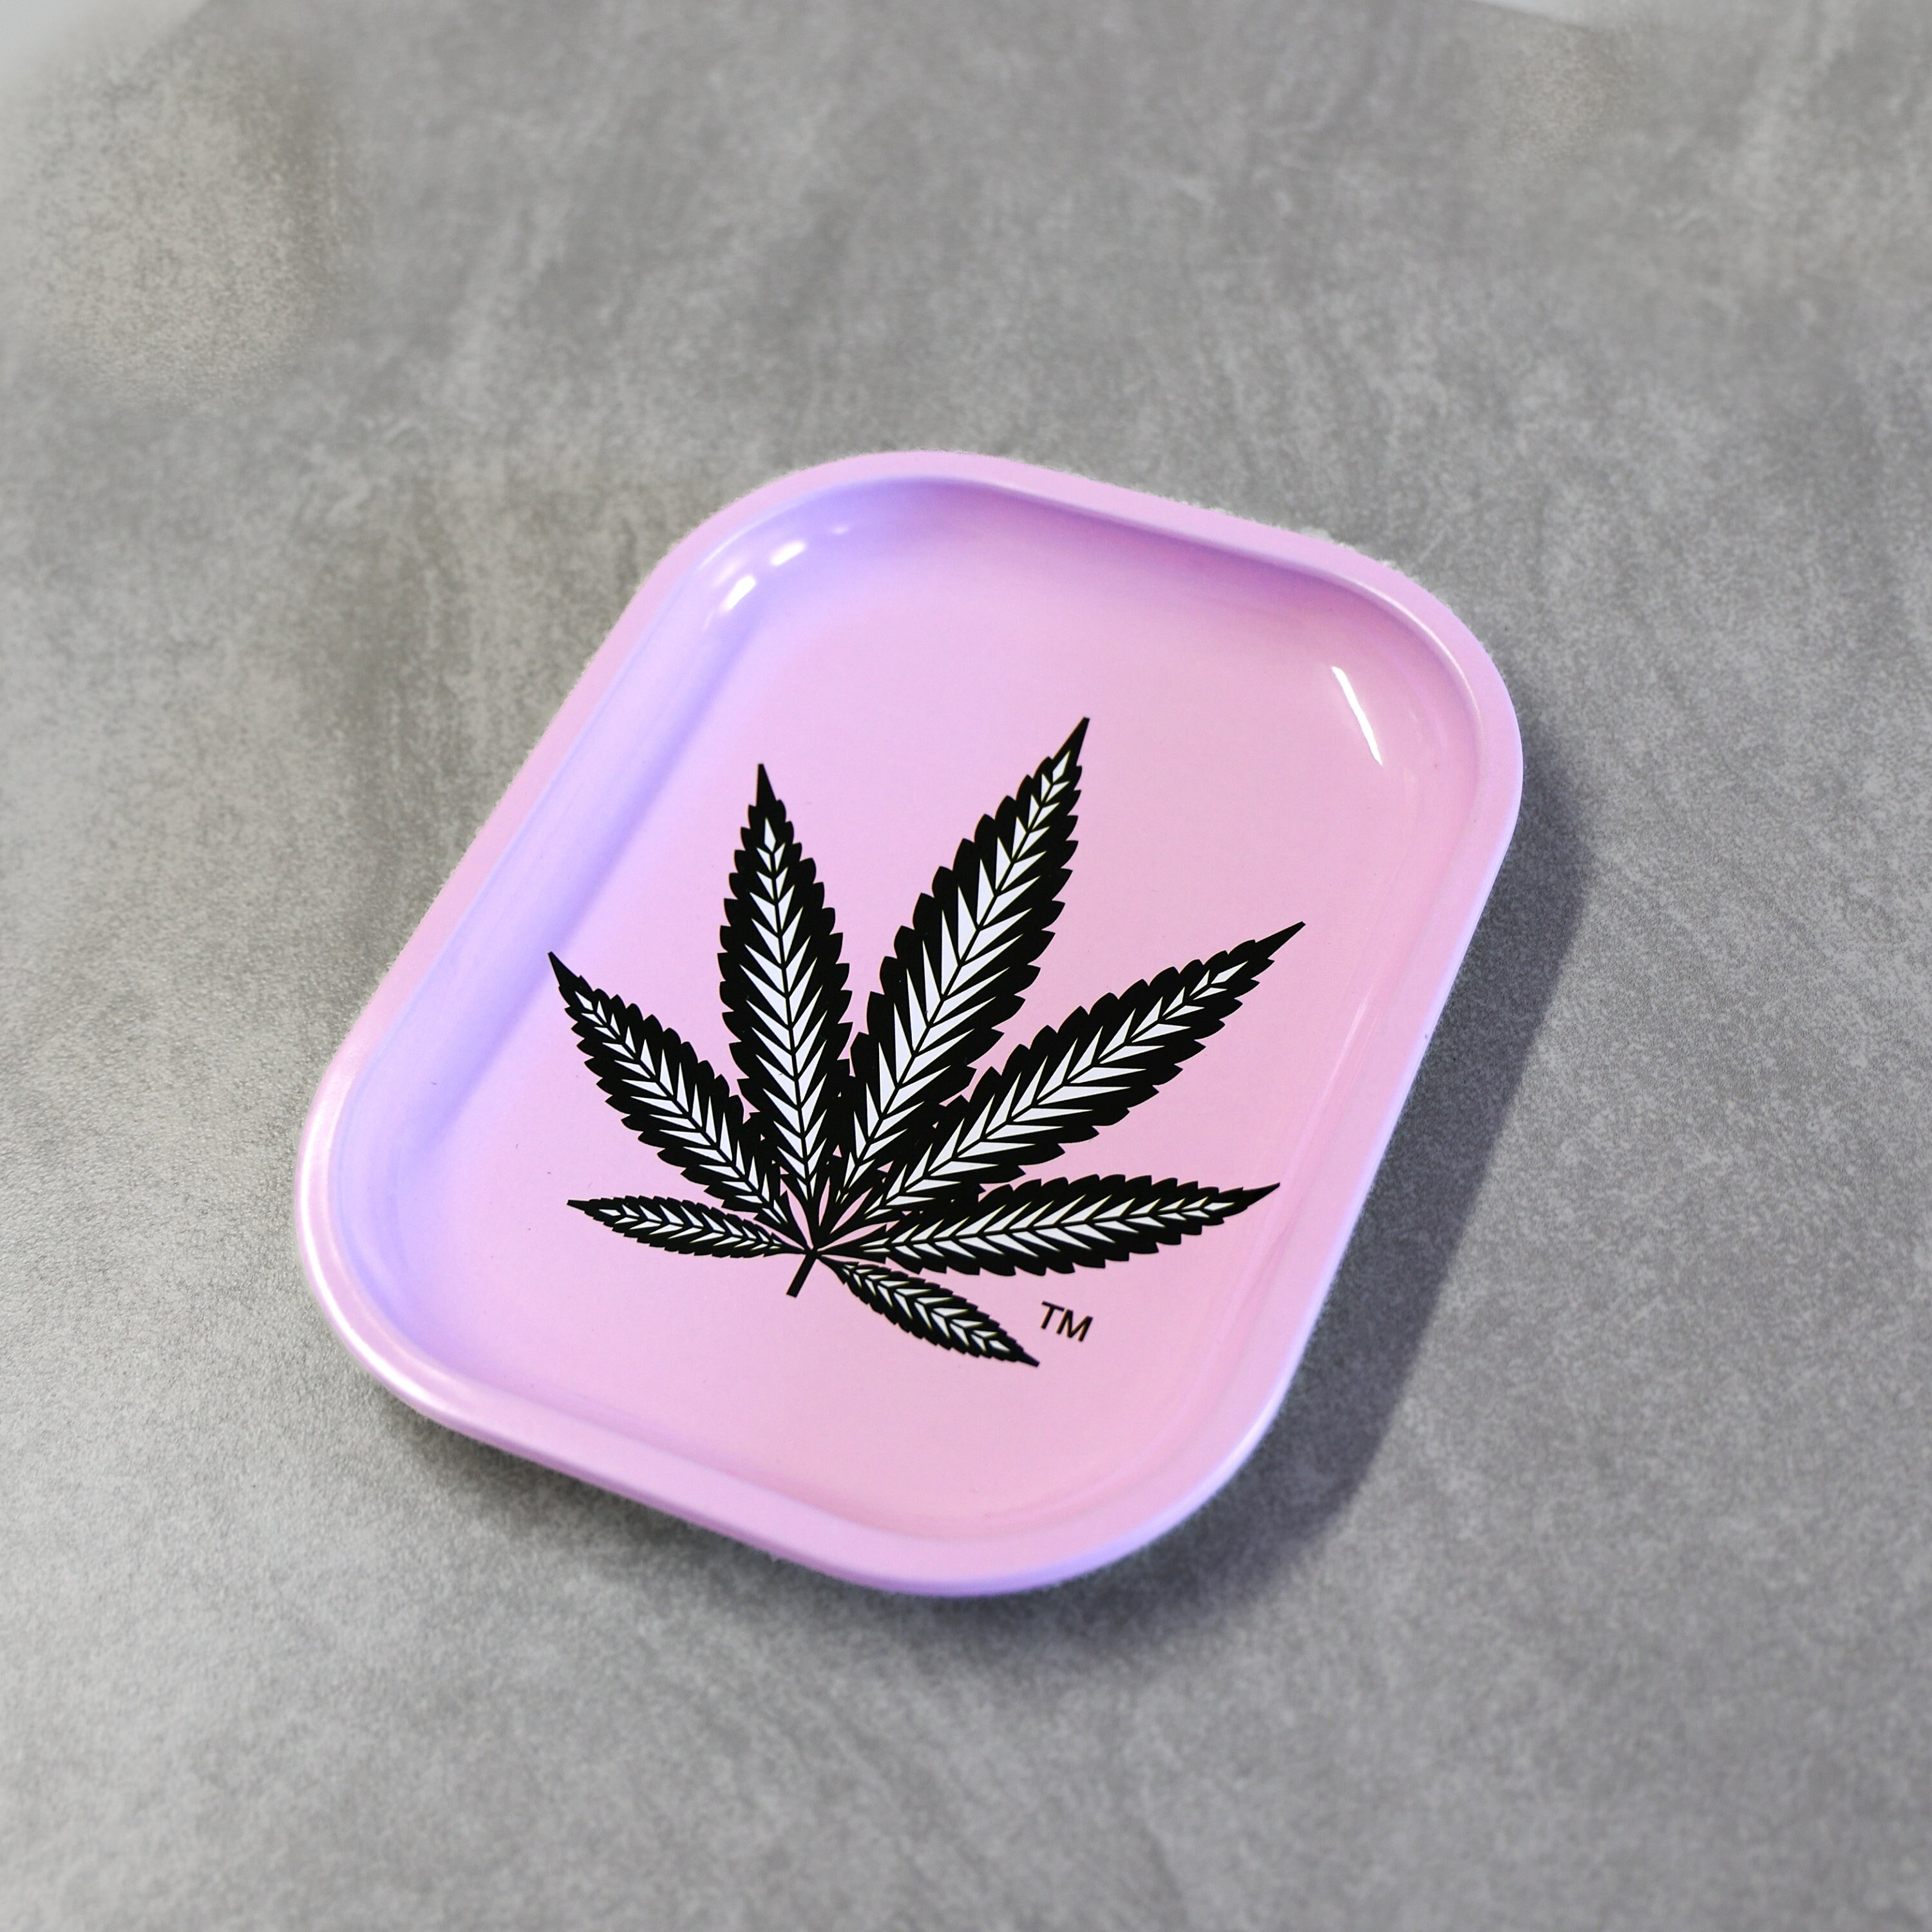 Wholesale Best Buds Cookies And Cream Metal Rolling Tray